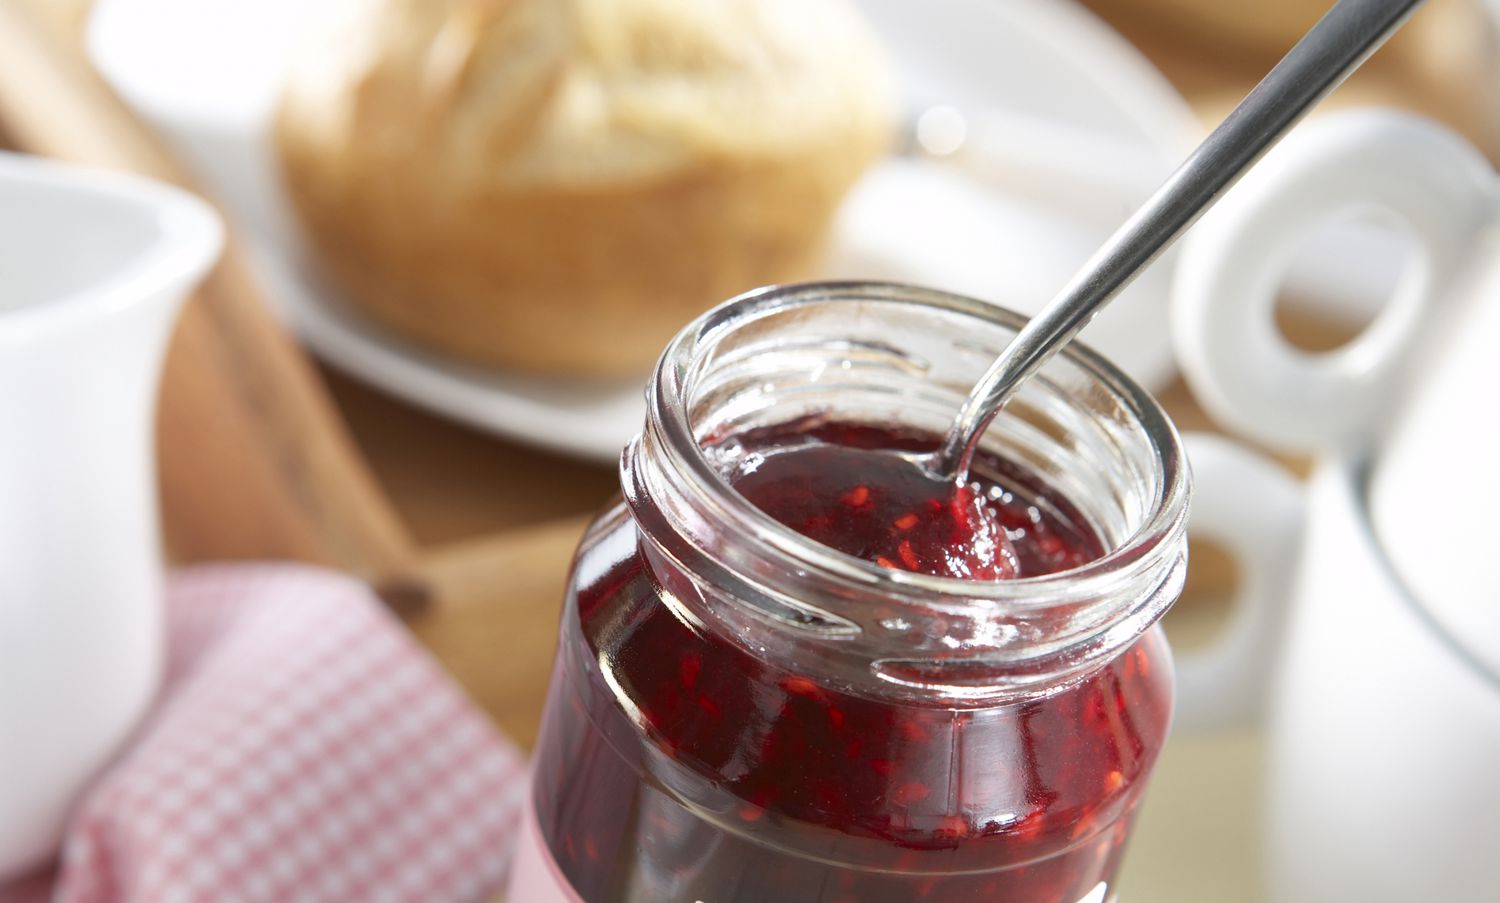 Sodium benzoate is used as a preservative in jams and jelly. It's safe for human consumption.